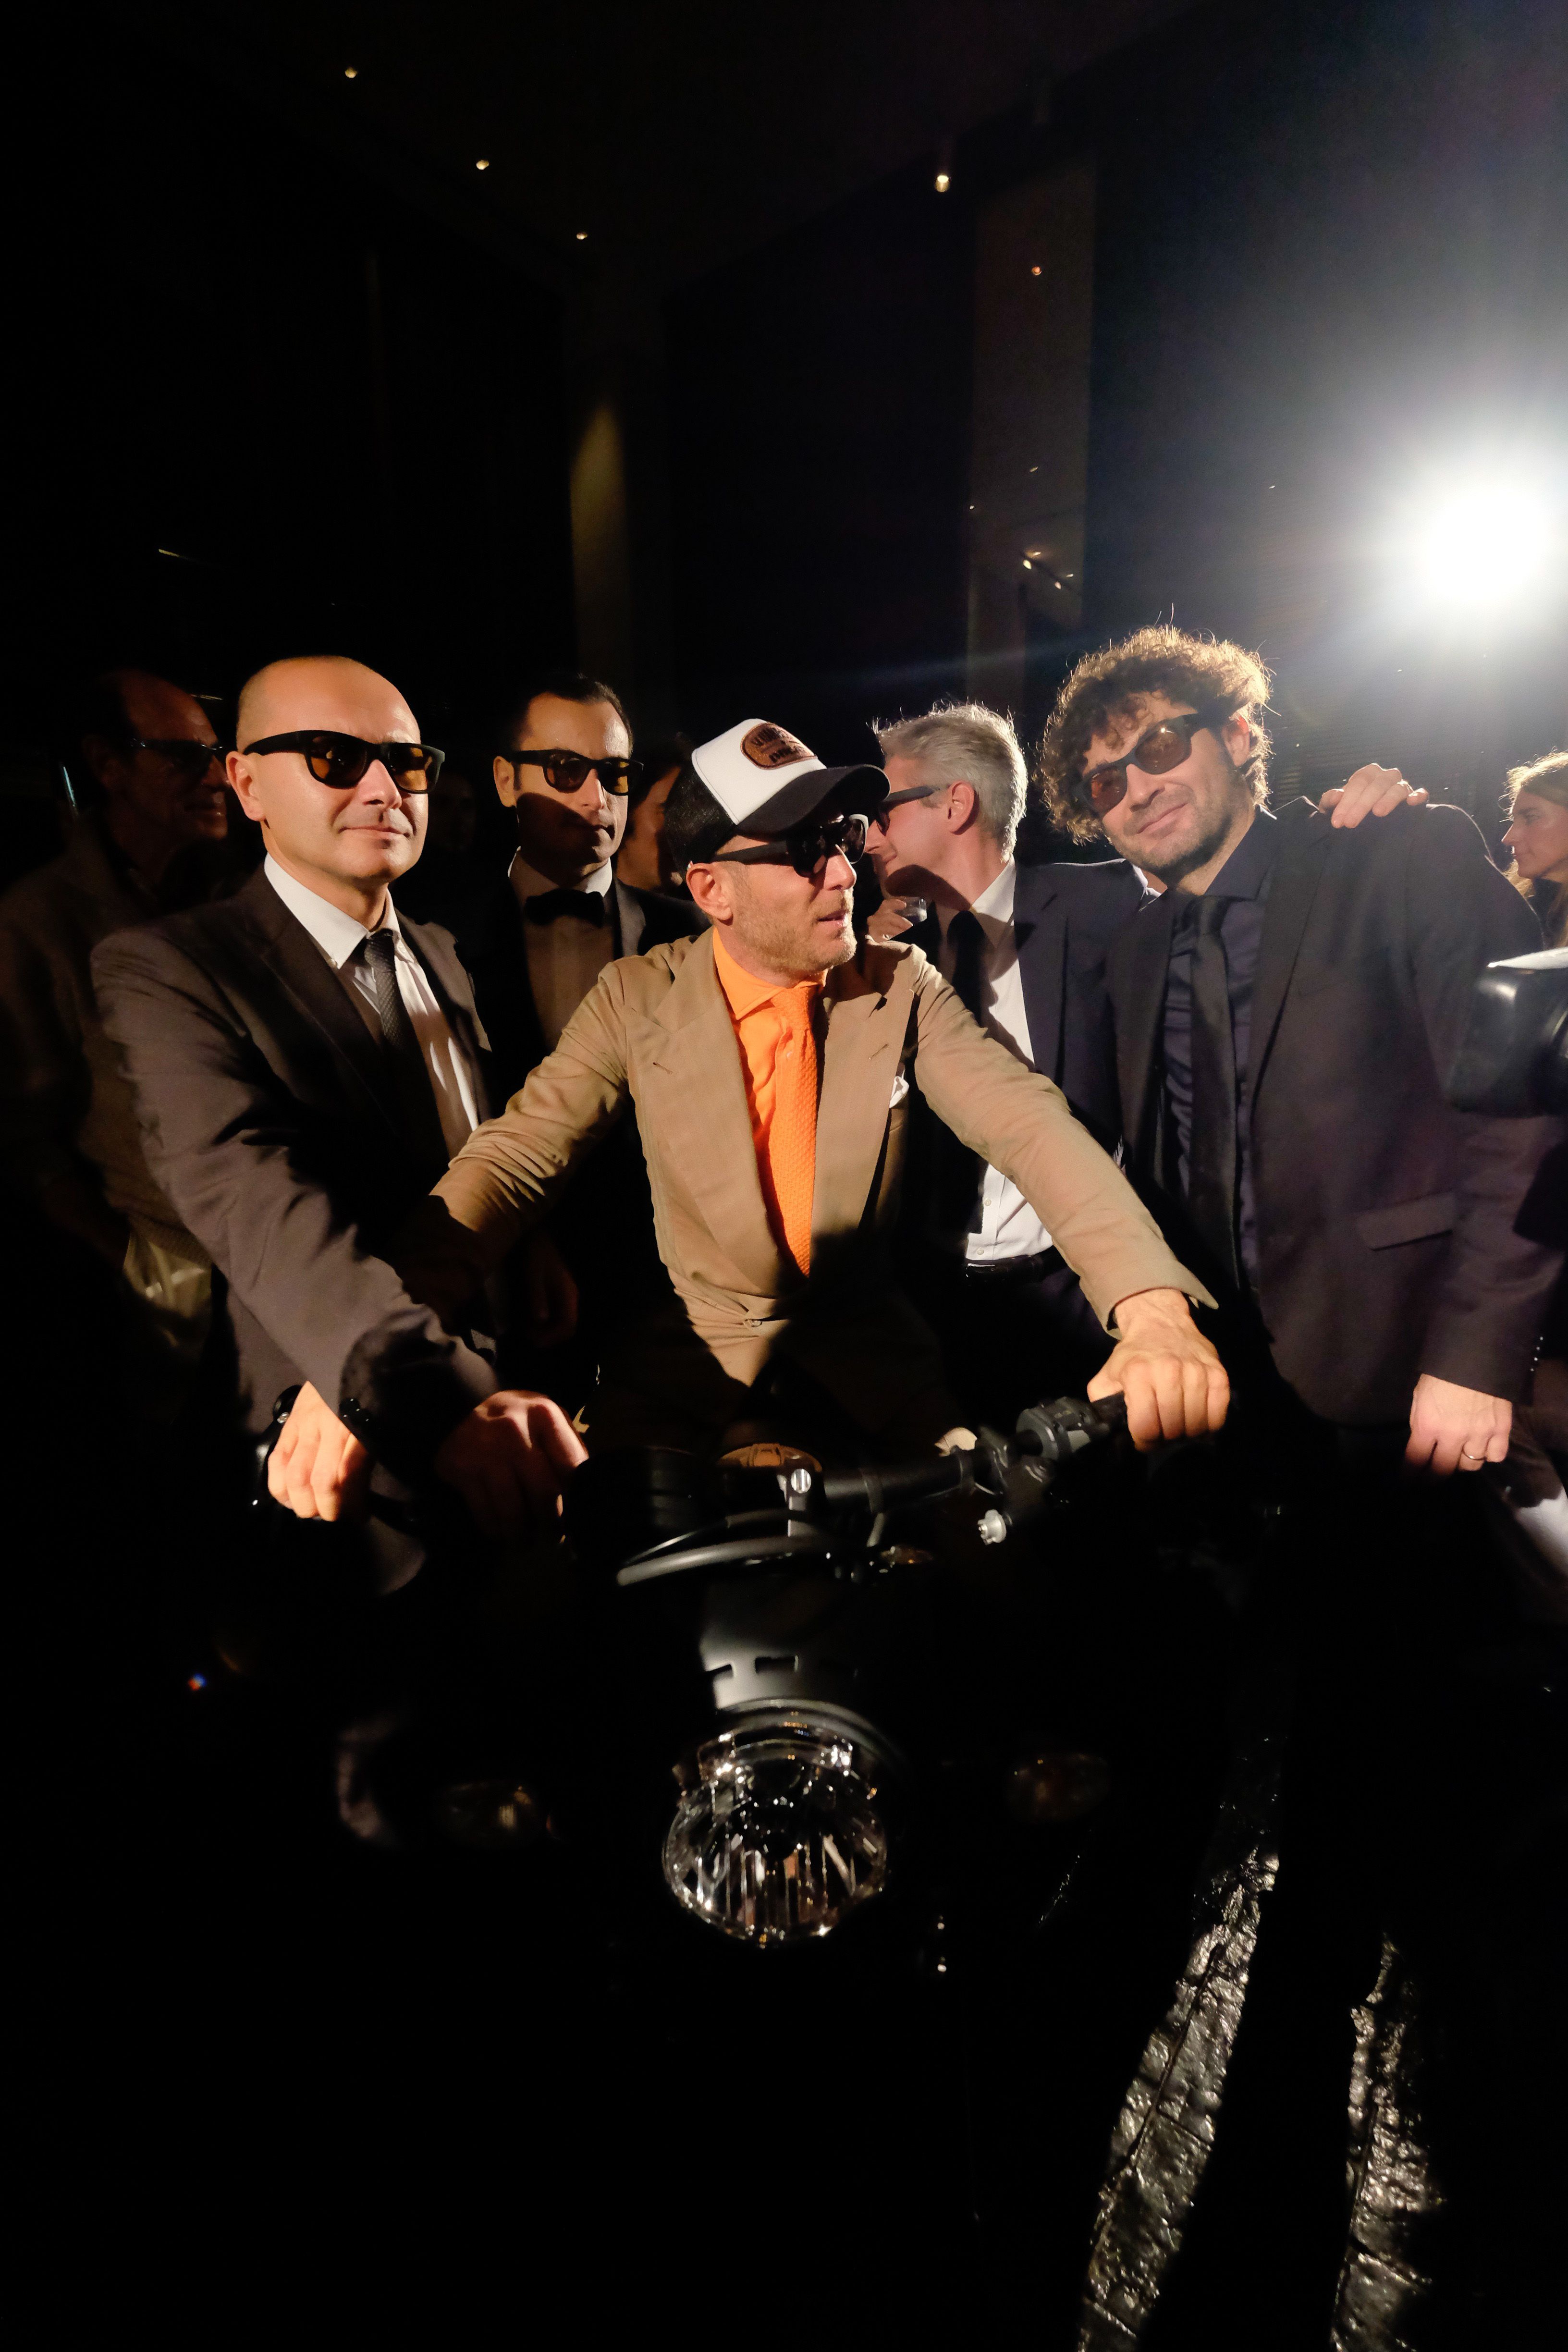 (from left) Andrea Ferraresi (Ducati Design Center Director), Lapo Elkann (Co-Founder and Chairman of Italia Independent), Alessandro Cicognani (Ducati Licensing Director)